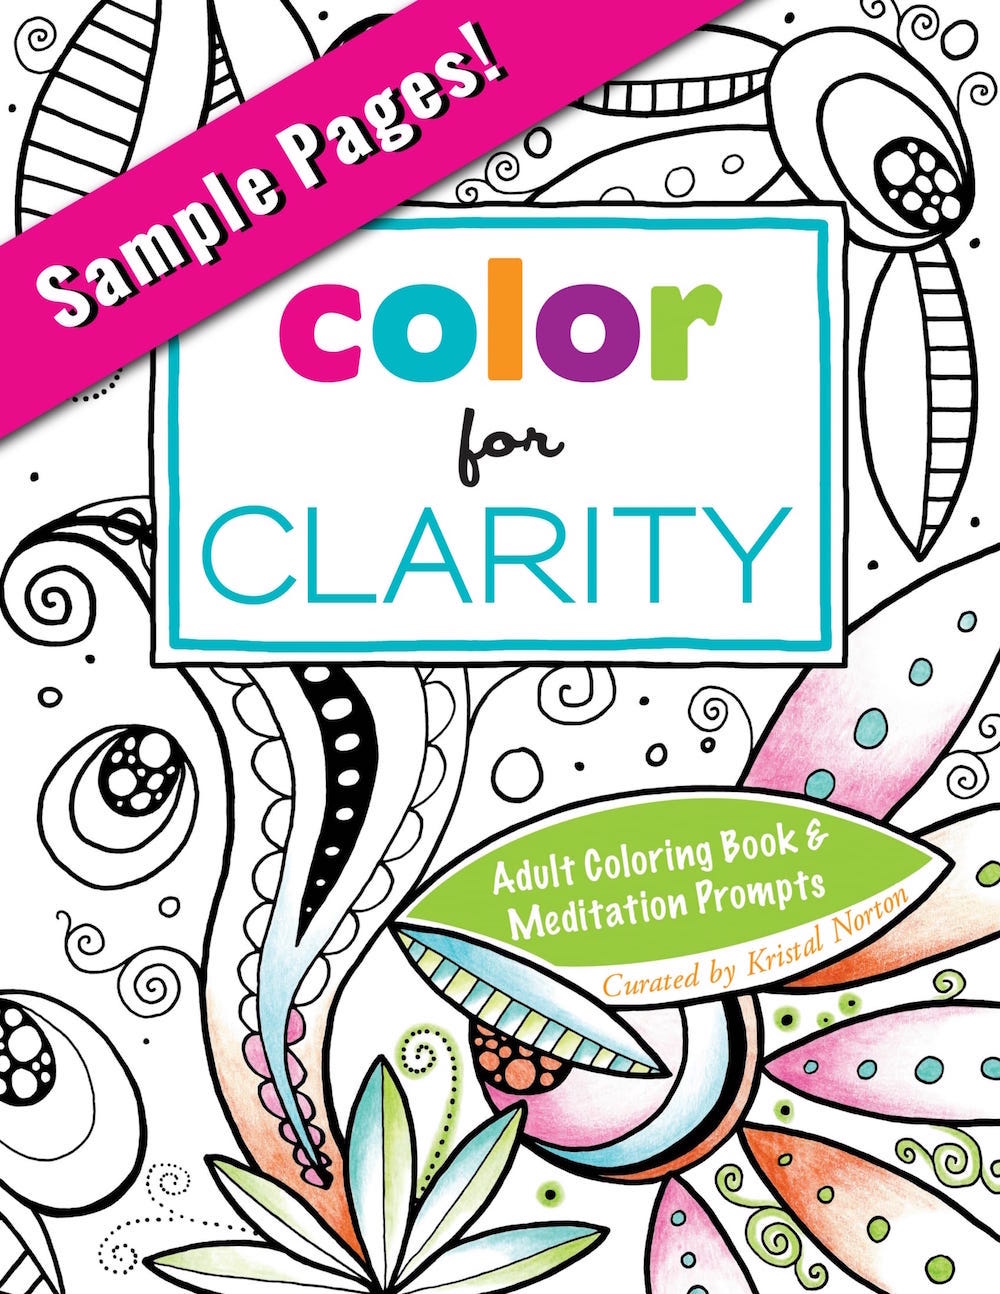 Color for Clarity sample pages